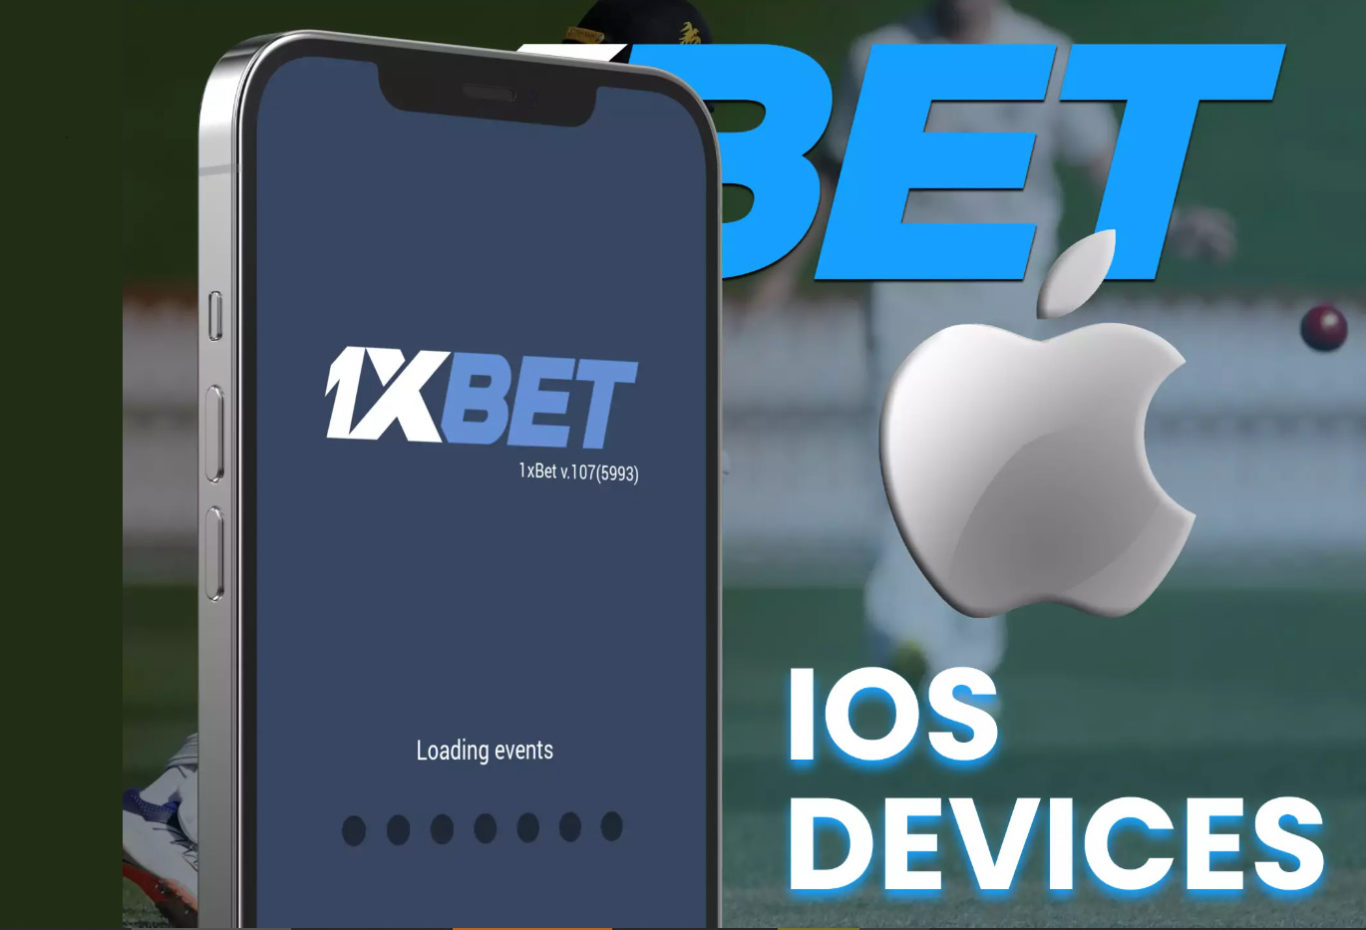 1xBet App Download for iOS Requirements